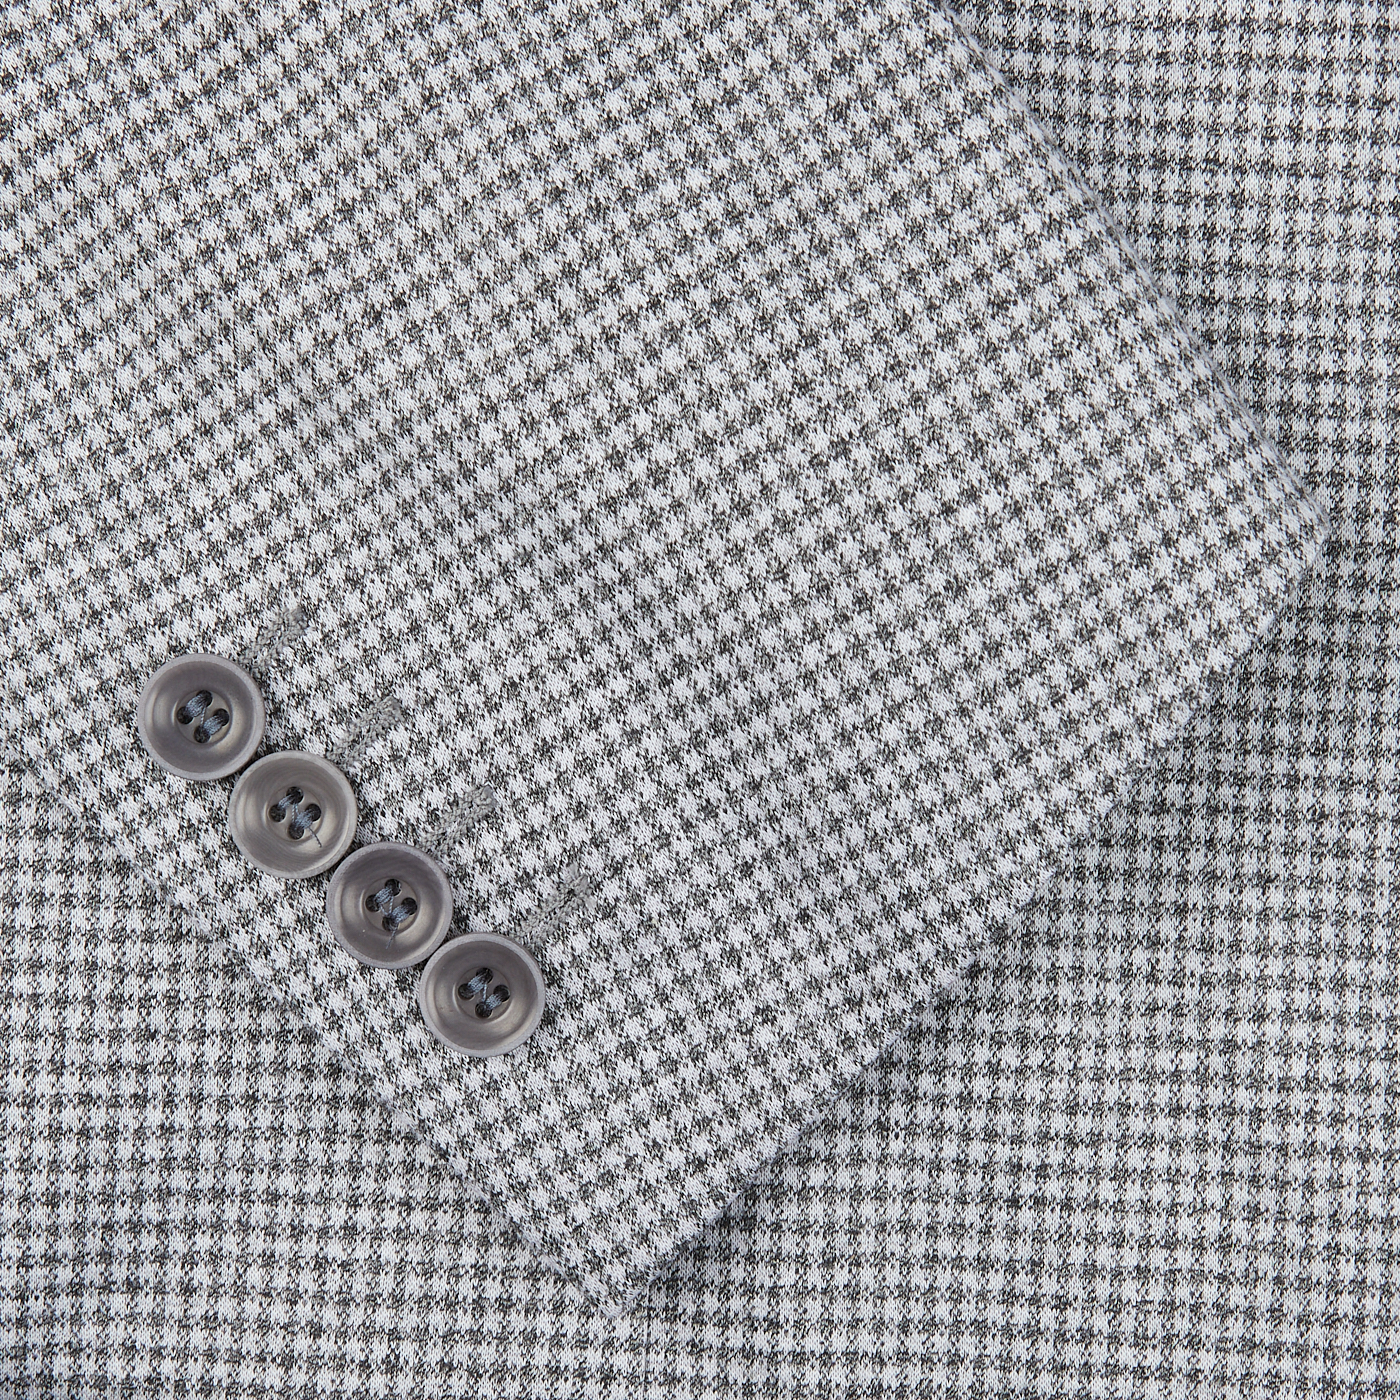 A close up of a Light Grey Houndstooth Cotton Jersey Blazer made by Canali, showcasing casual tailoring.